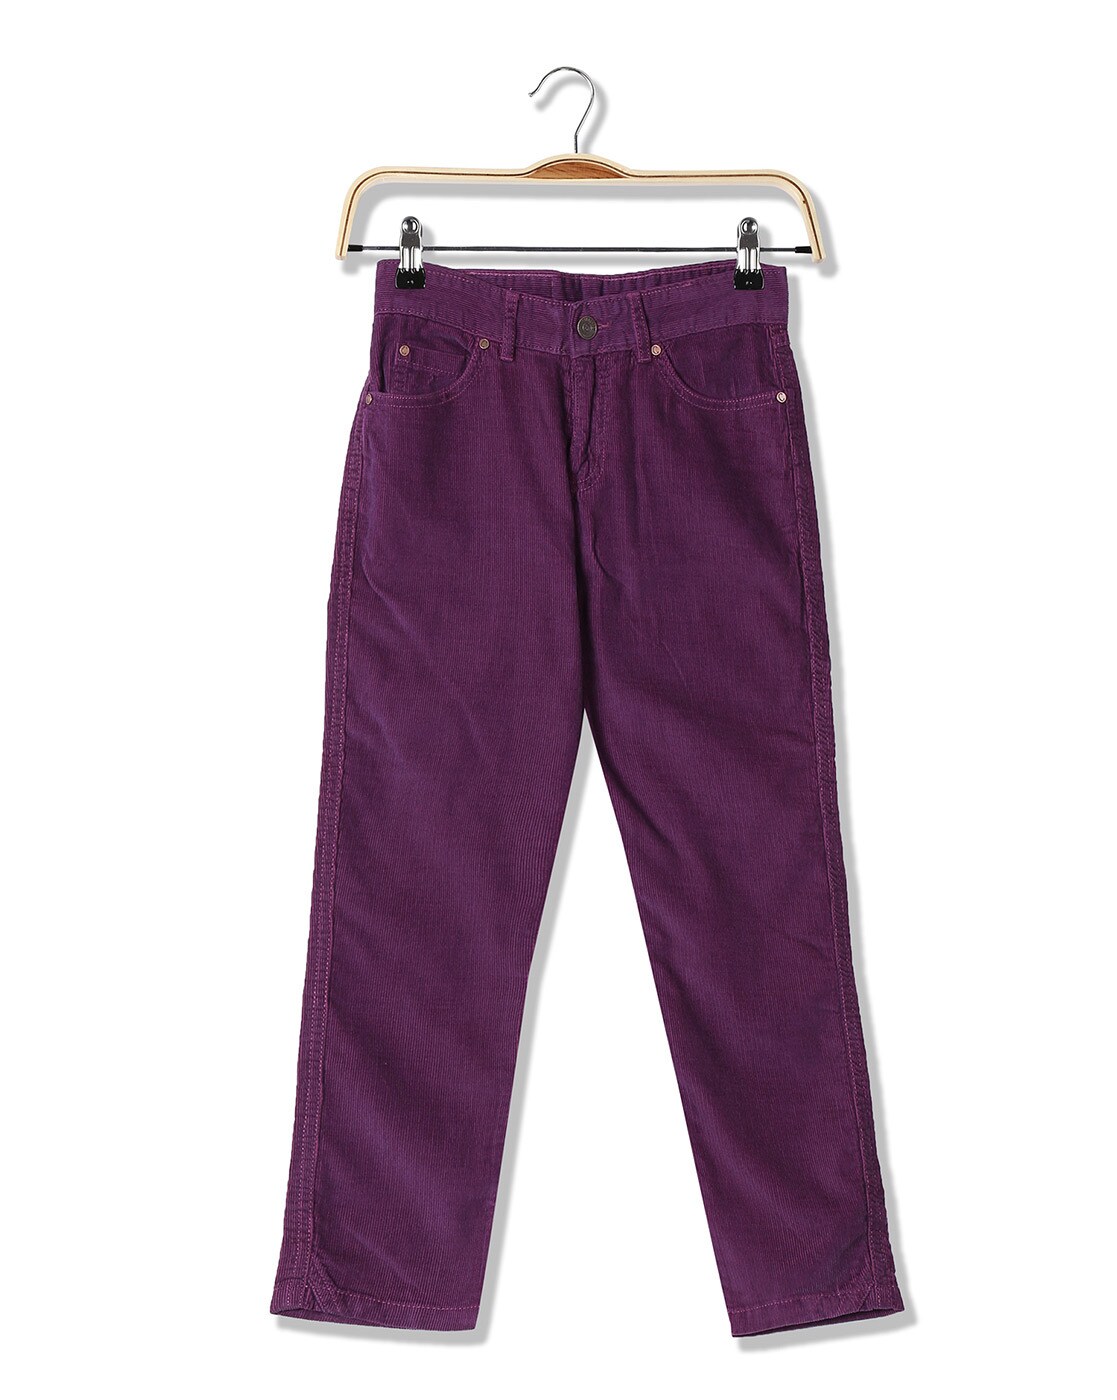 Purple Needlecord Trousers  Mens Country Clothing  Cordings US